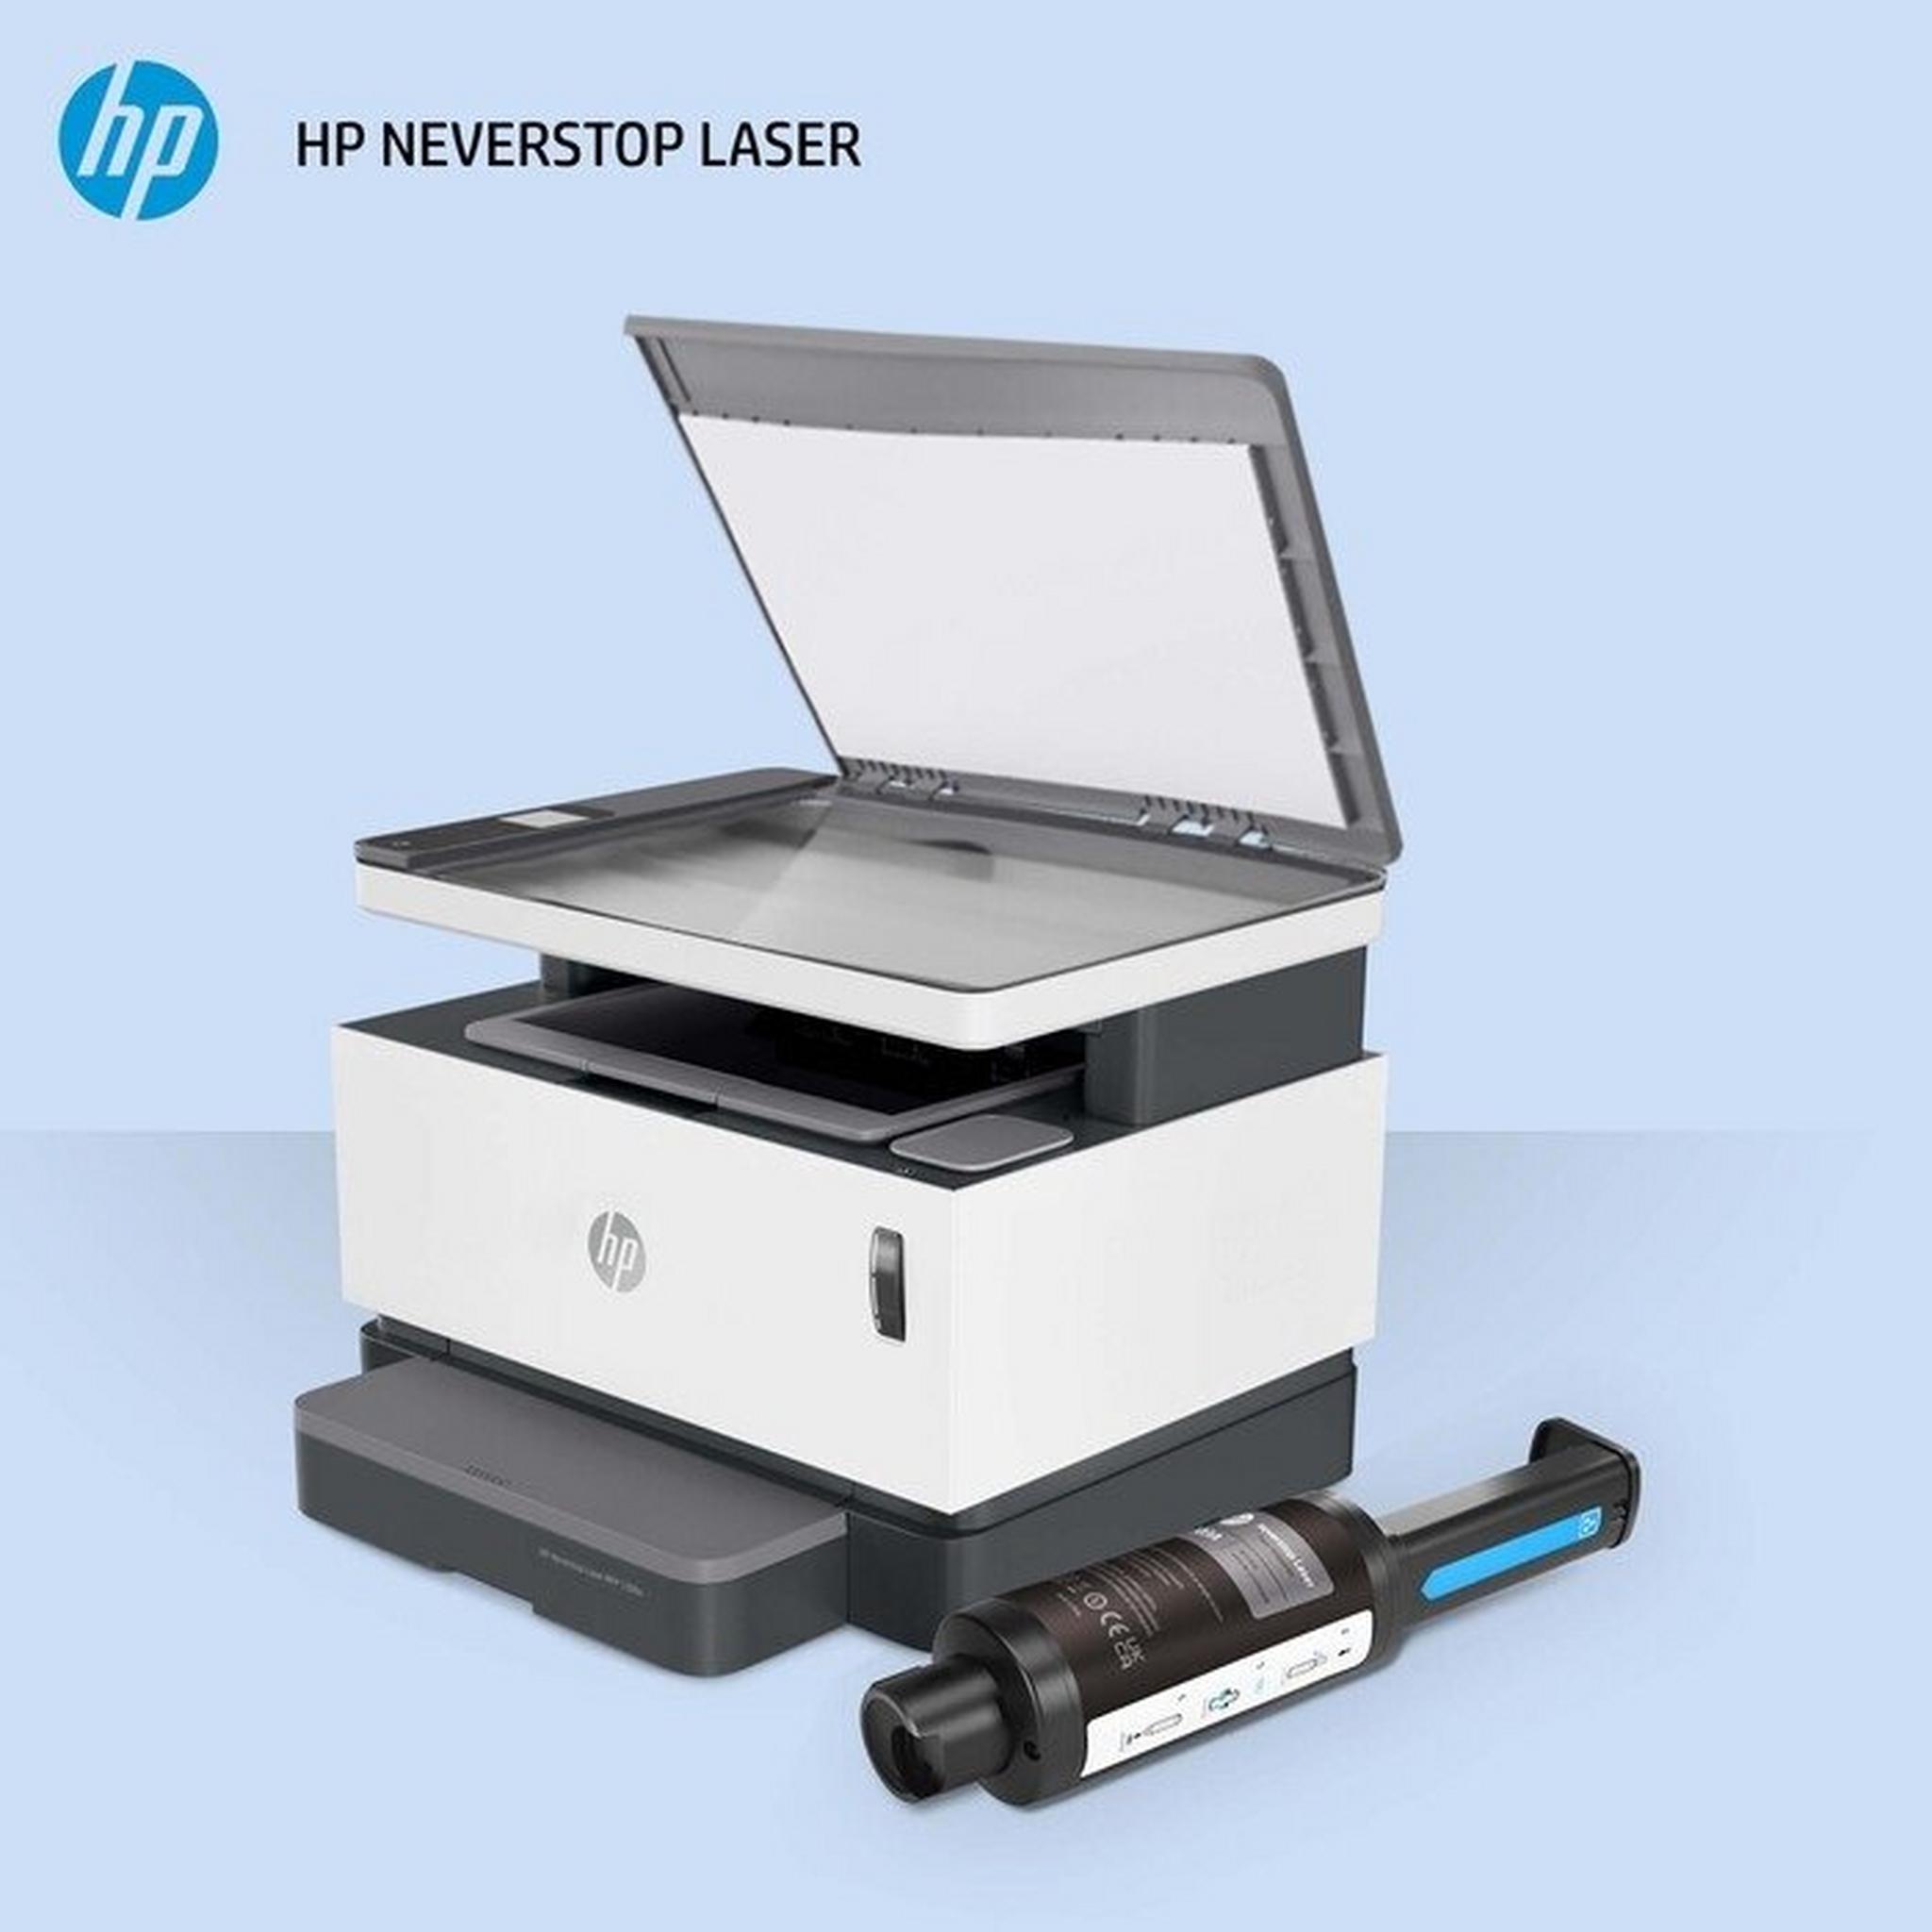 HP Neverstop MFP 1200W 3in1 Laser Printer - (4RY26A)